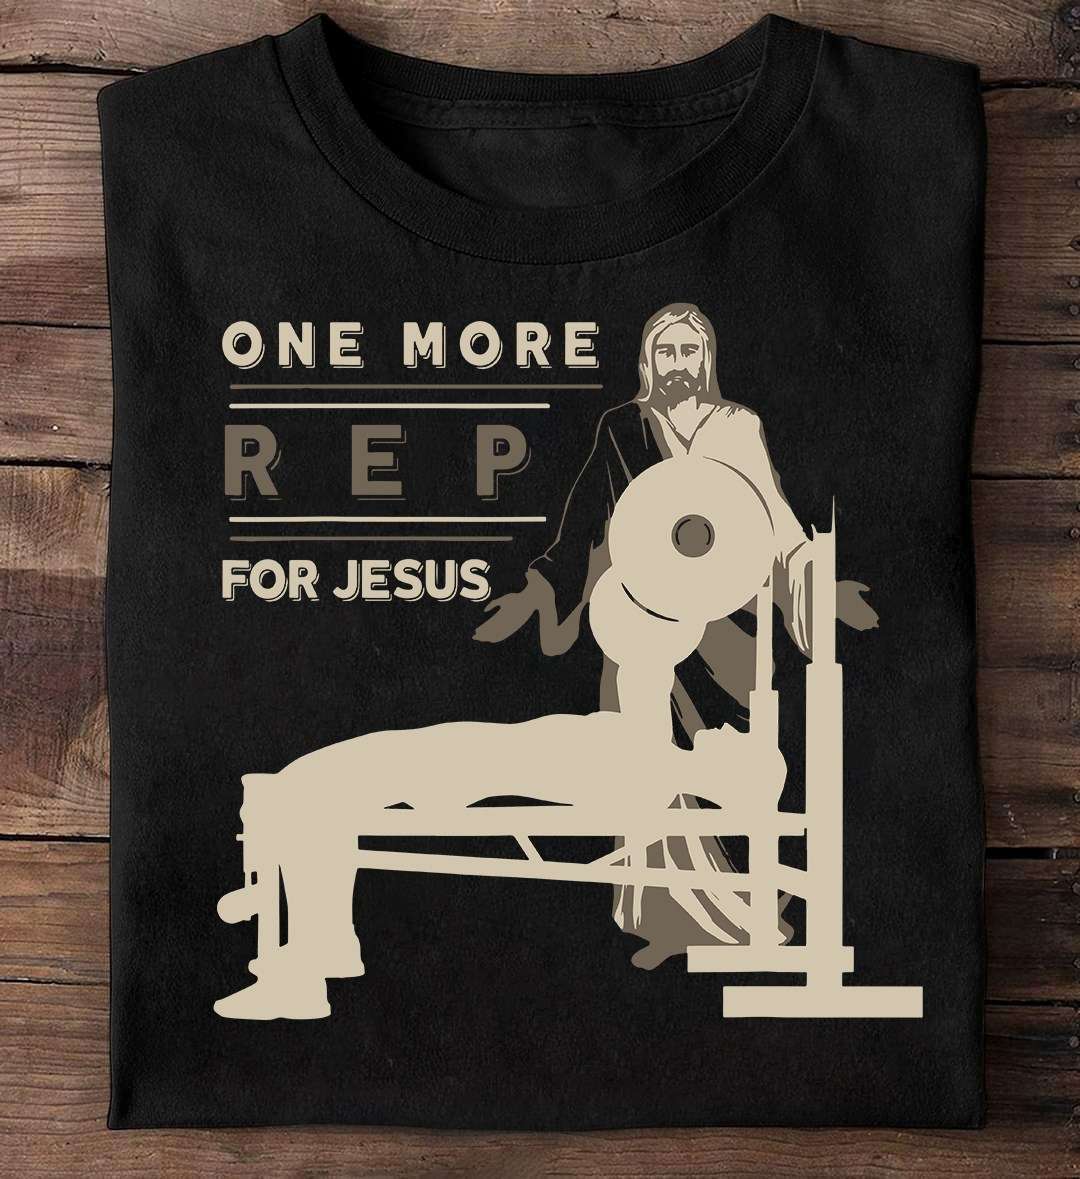 One more rep for Jesus - Jesus and lifting, lifting heavy metal